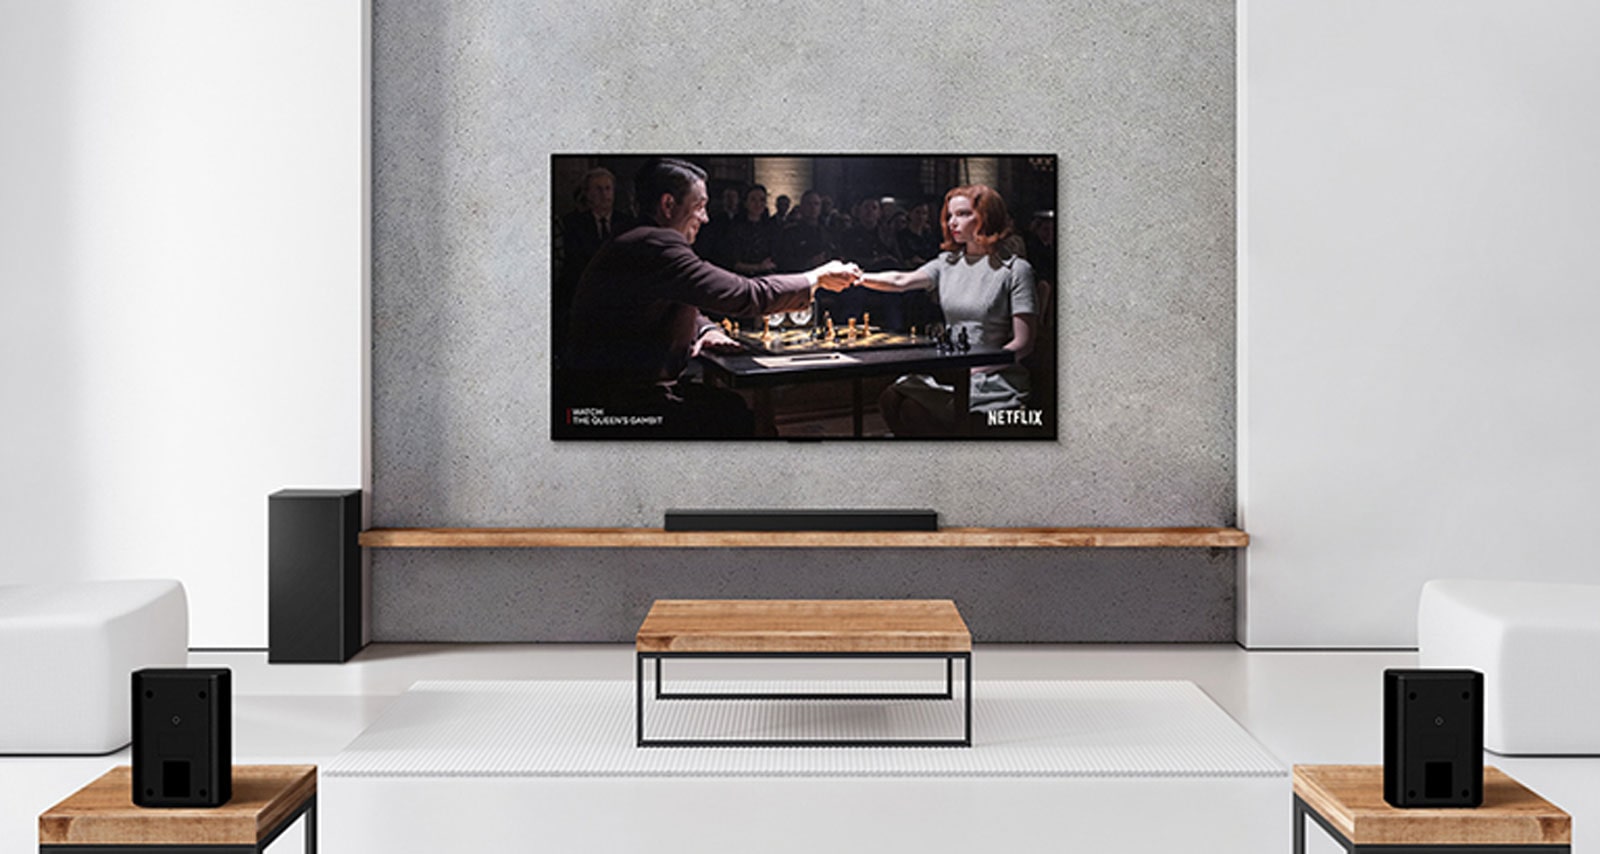 A set of 2 rear speakers, subwoofer, and a soundbar, and TV are in a white living room. A woman and a man are playing chess on TV screen.